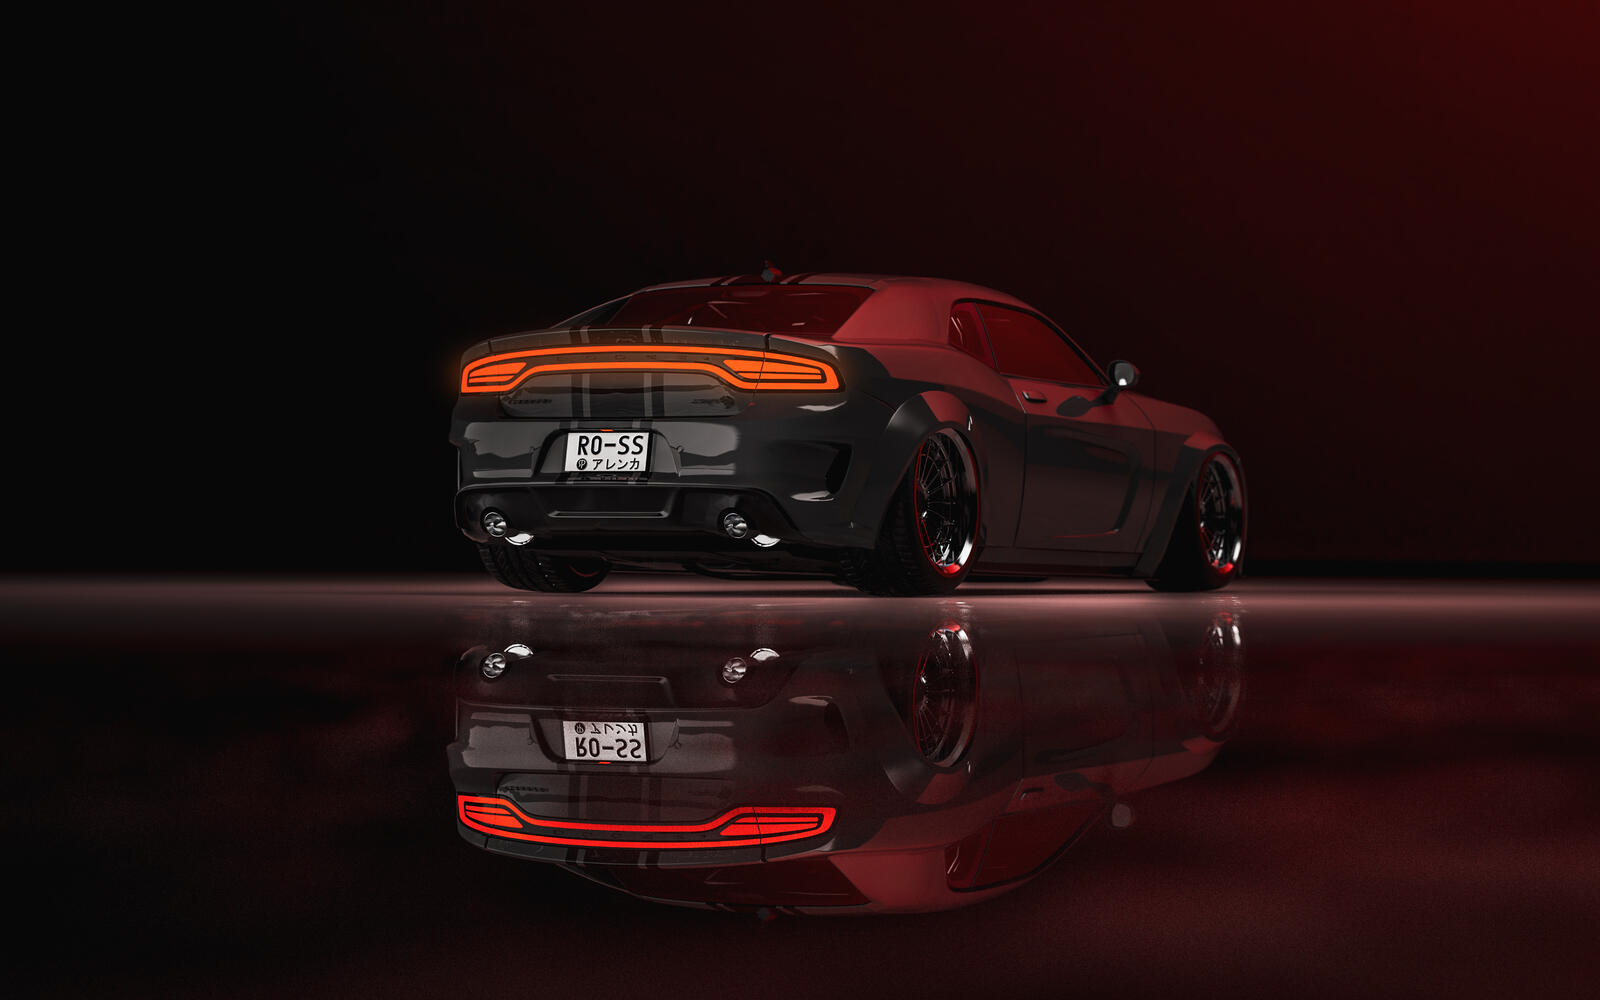 Free photo Renderings of the Dodge Charger rear view image